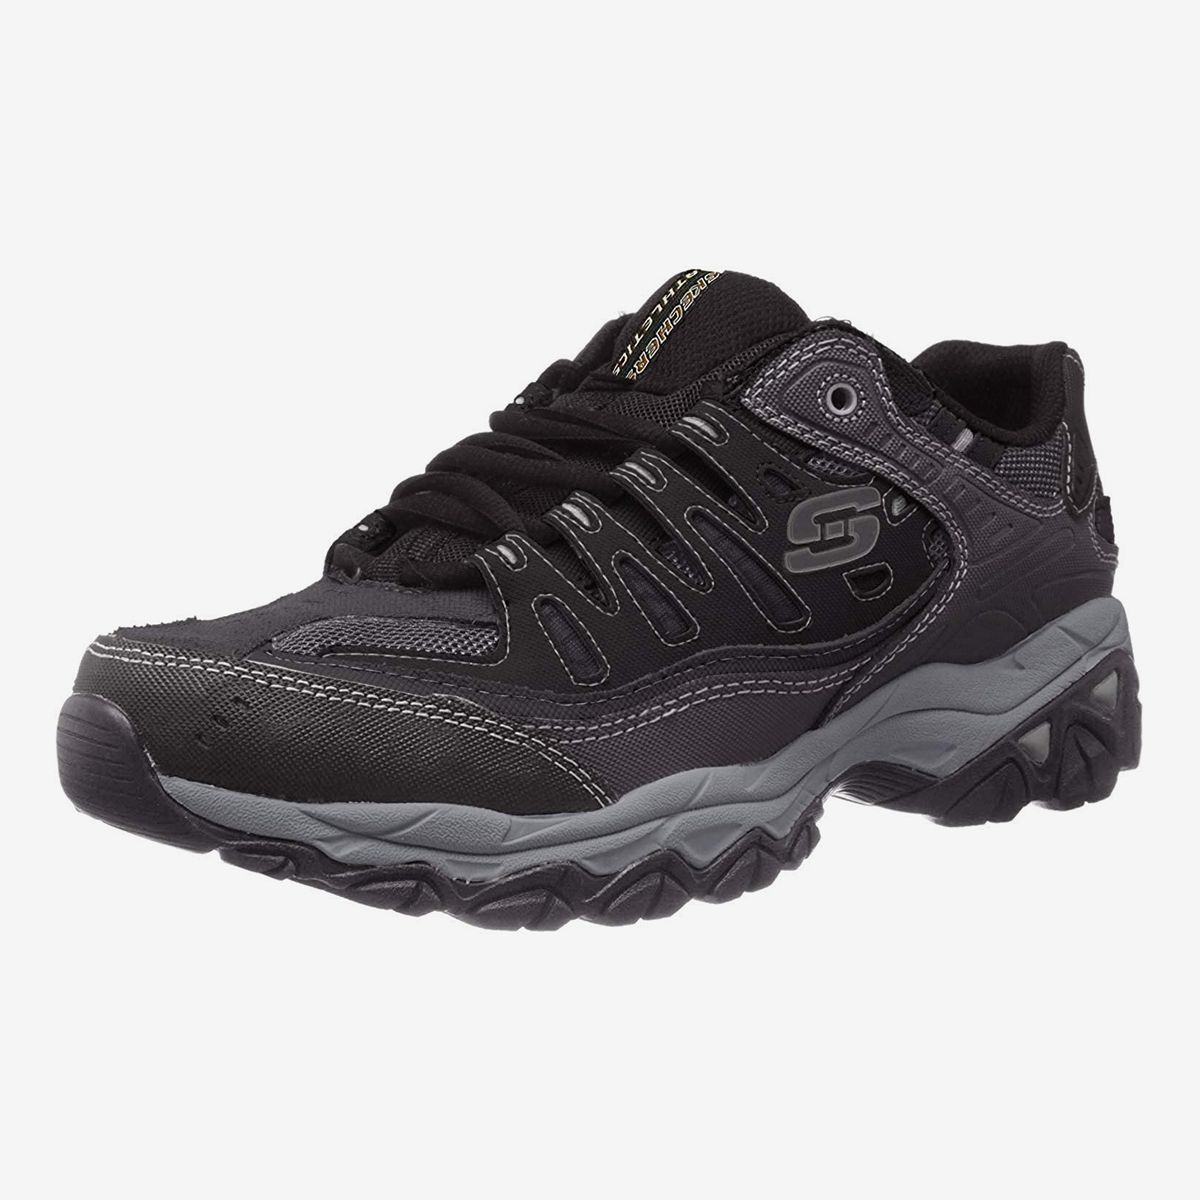 skechers mens shoes without laces